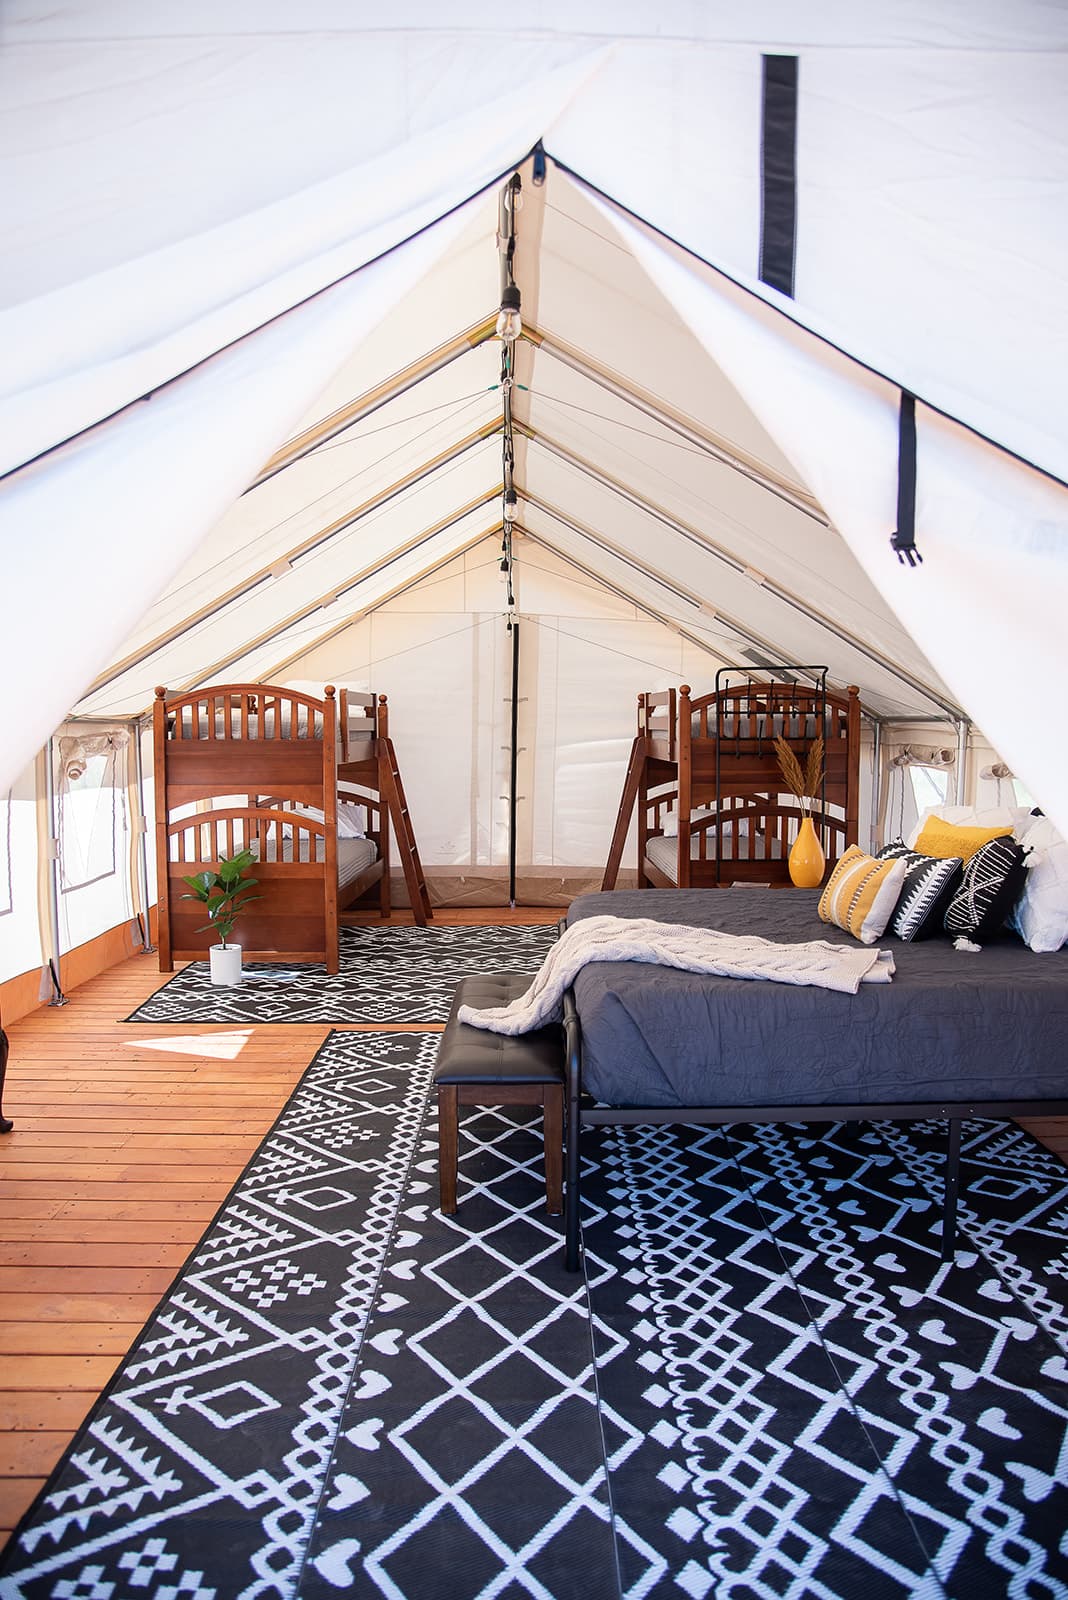 This pictures show the basic layout of the tent with a king size bed and two bunk beds.